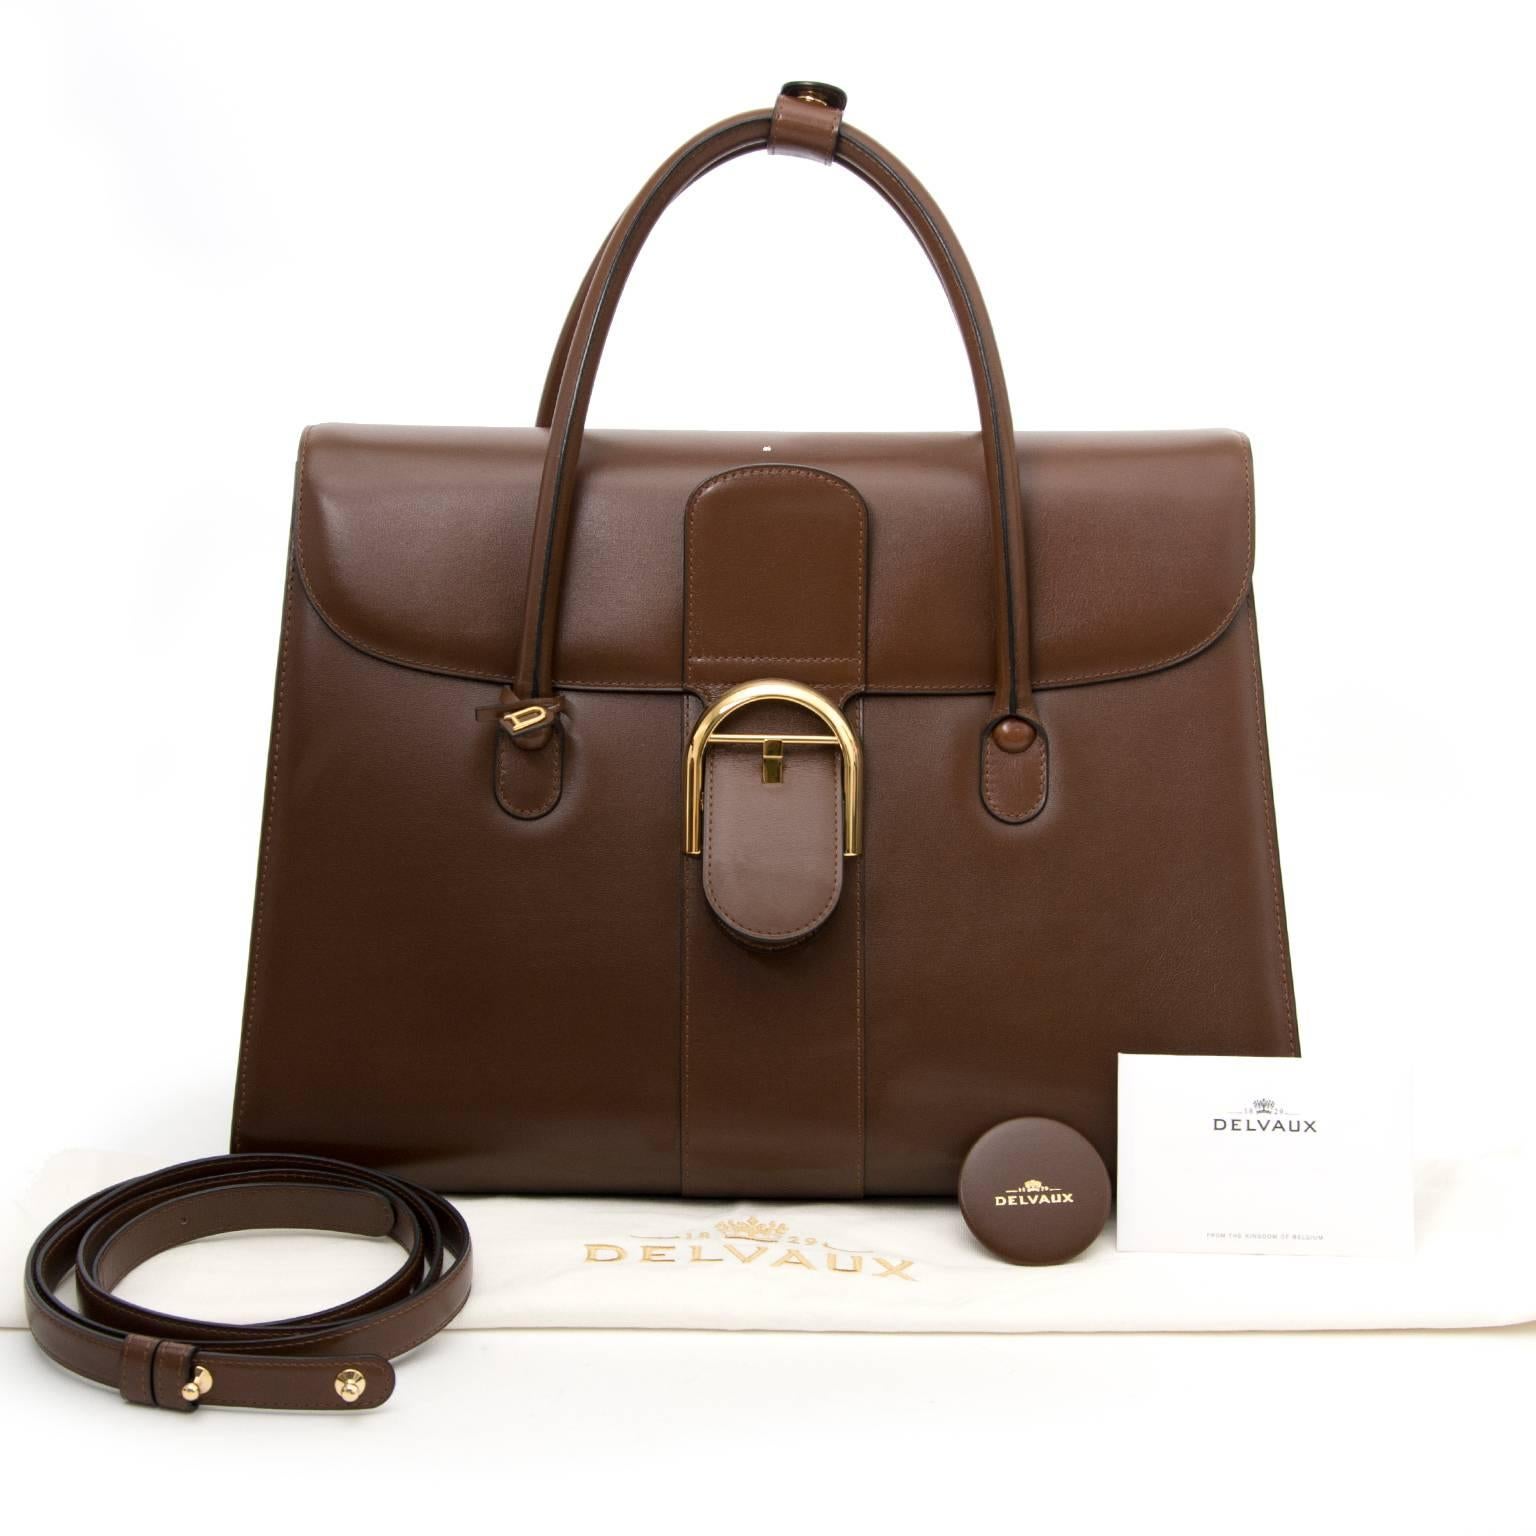 Delvaux Double Poignée Brillant bag in brown box calf leather with gold hardware. This beautiful bag is the ideal bag for work. It will add a professional look to any outfit. The bag features the iconic Brillant closure. On the inside you can find